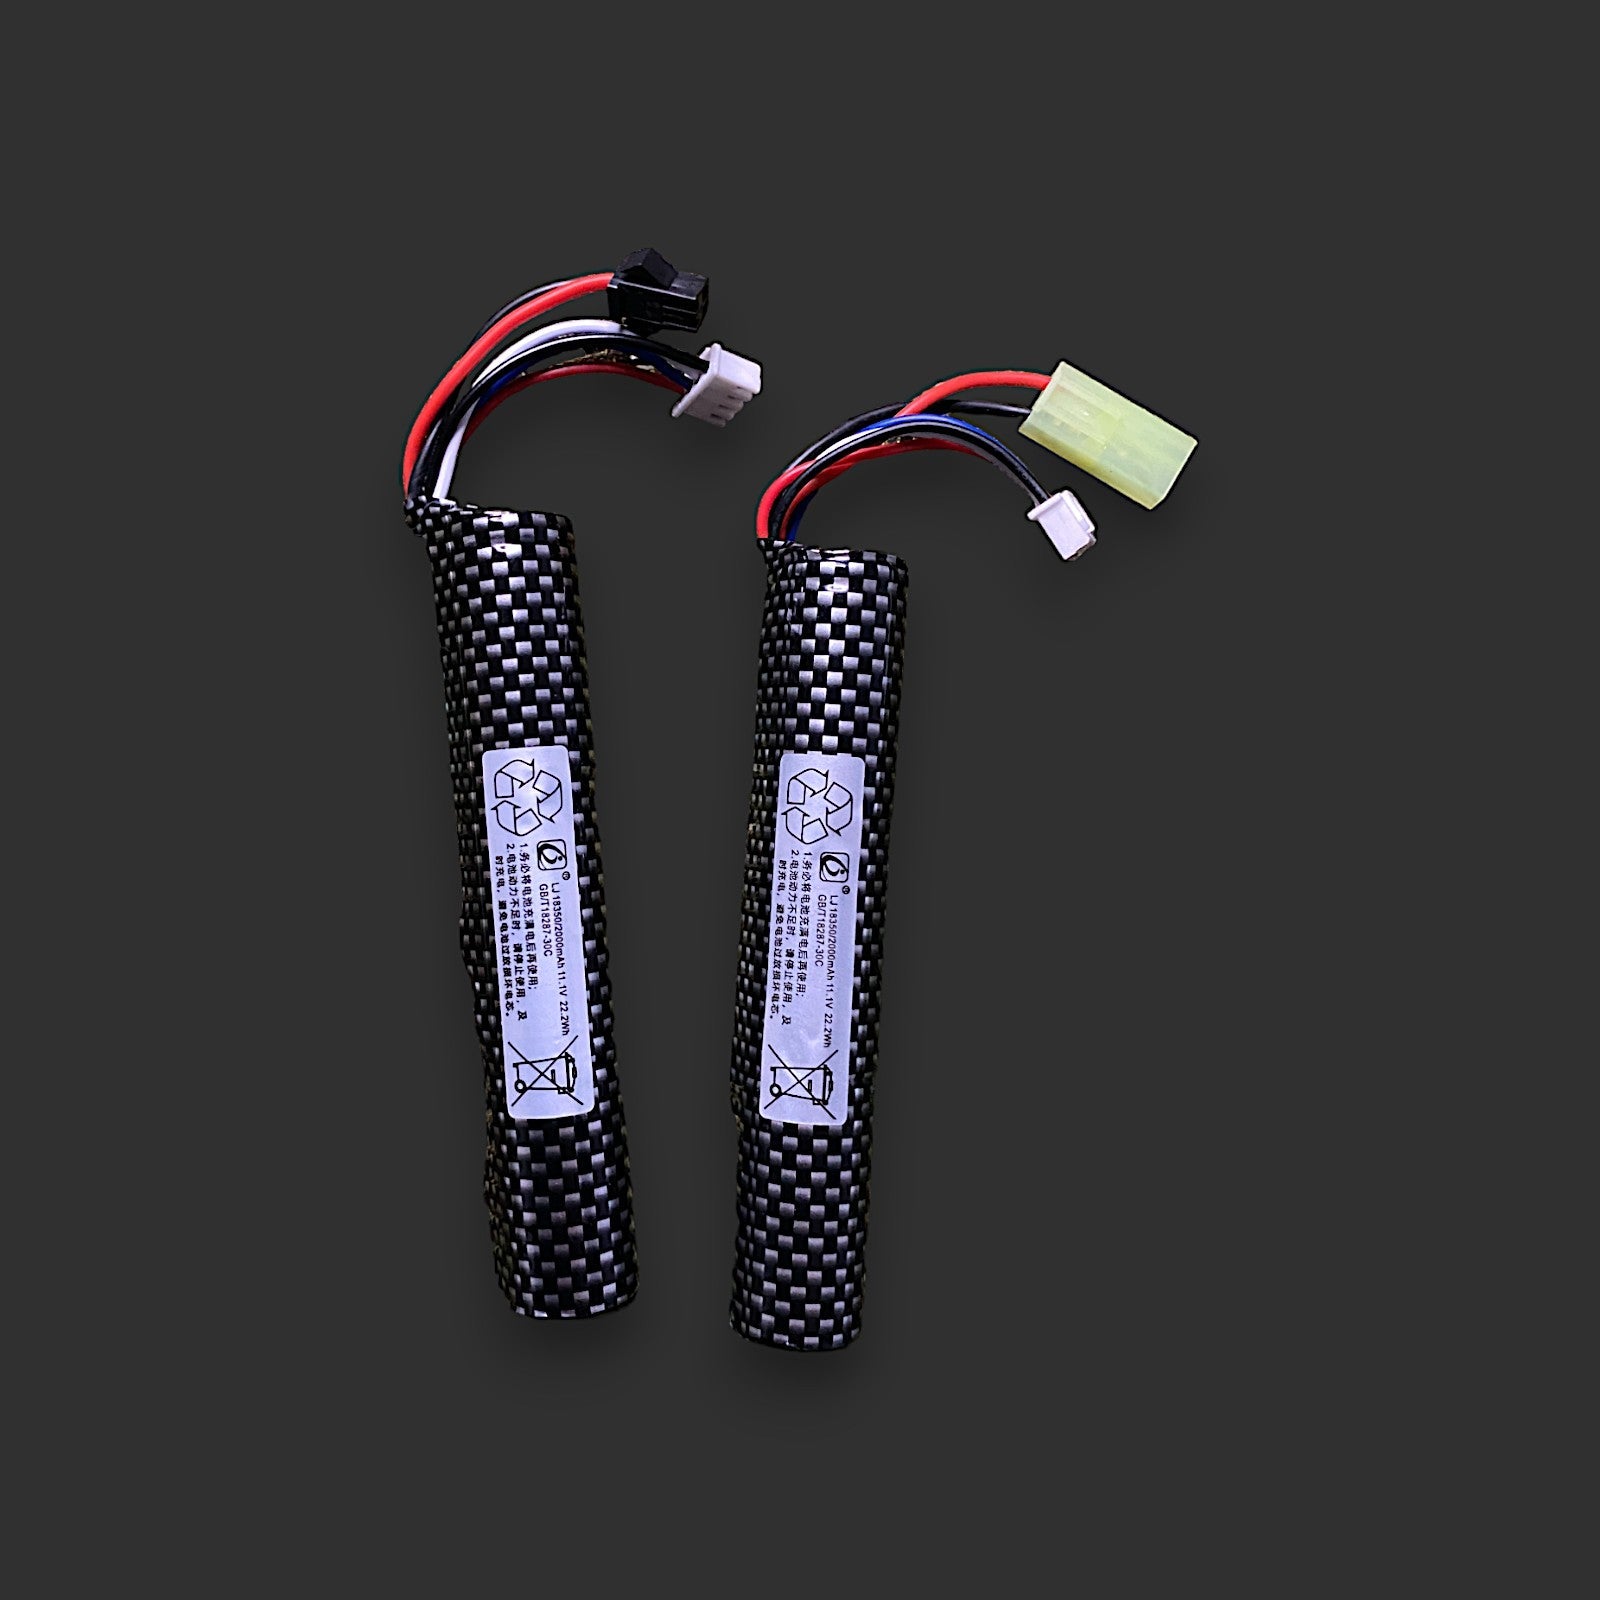 Two BlasterMaster cylindrical 11.1V 2000mAh lithium-ion batteries with carbon fiber patterns and connected wires, isolated on a gray background.